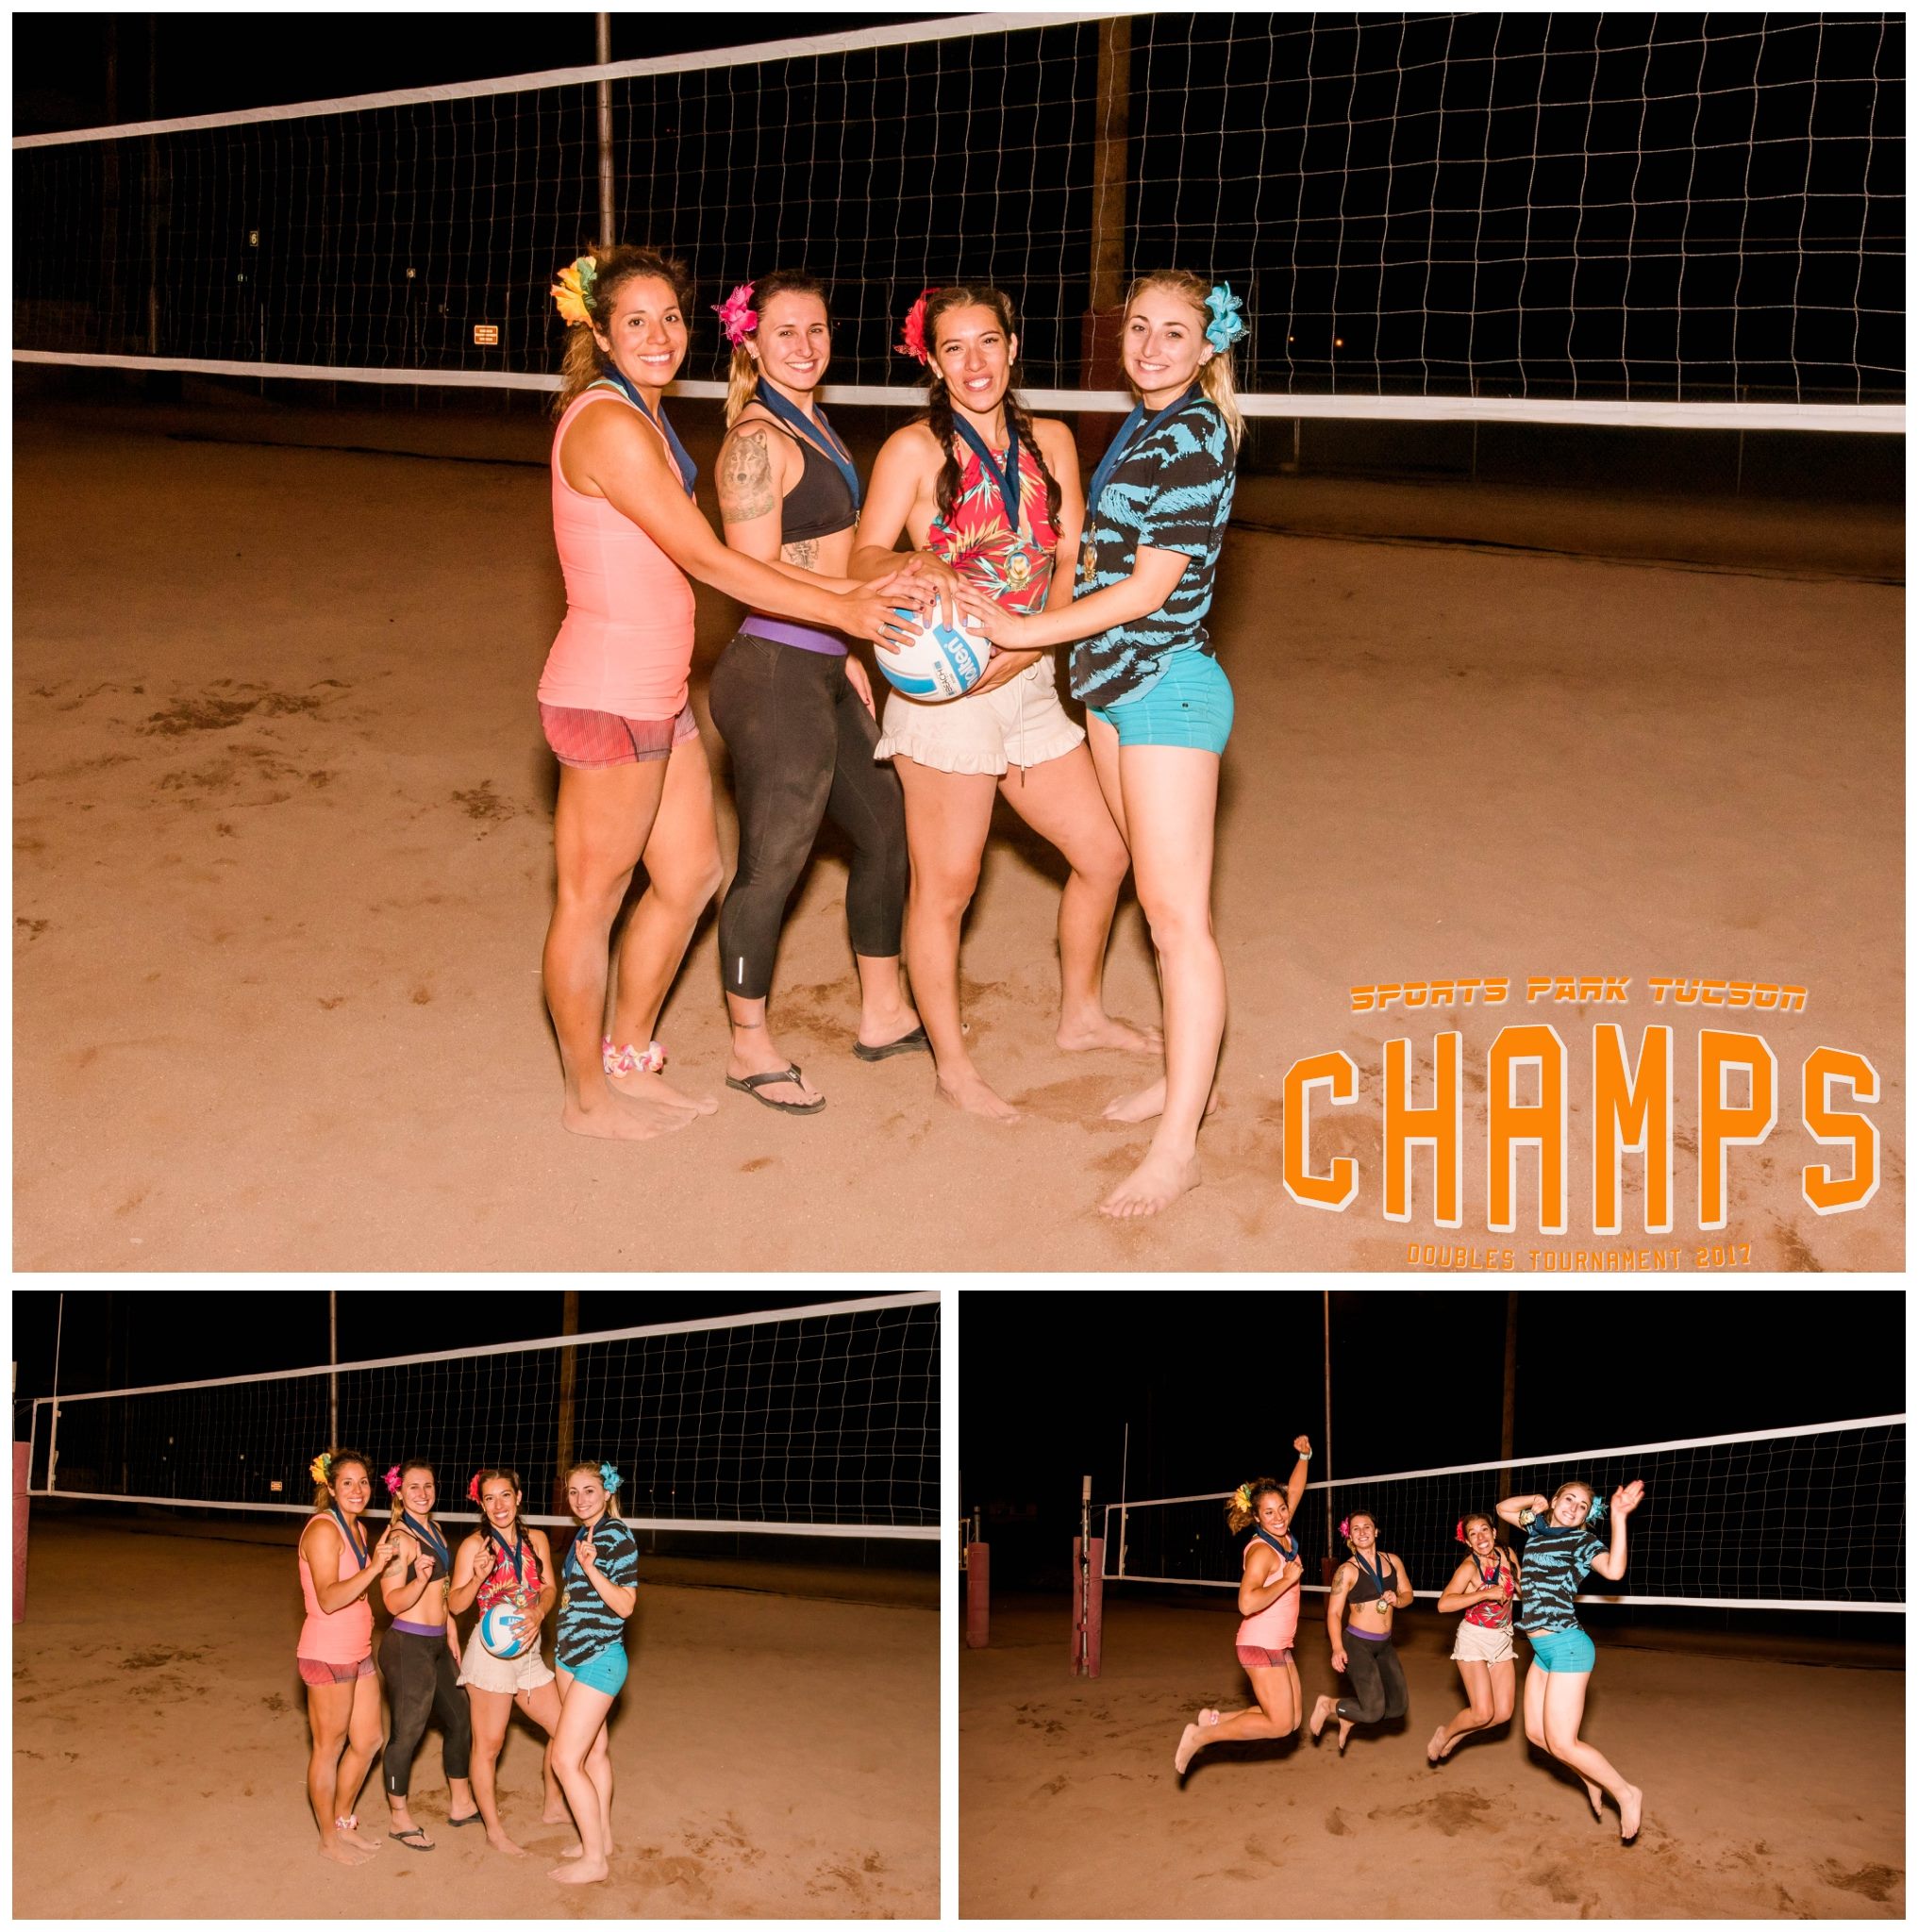 August 19th Volleyball Tournament (Women's) - 7PM Champions